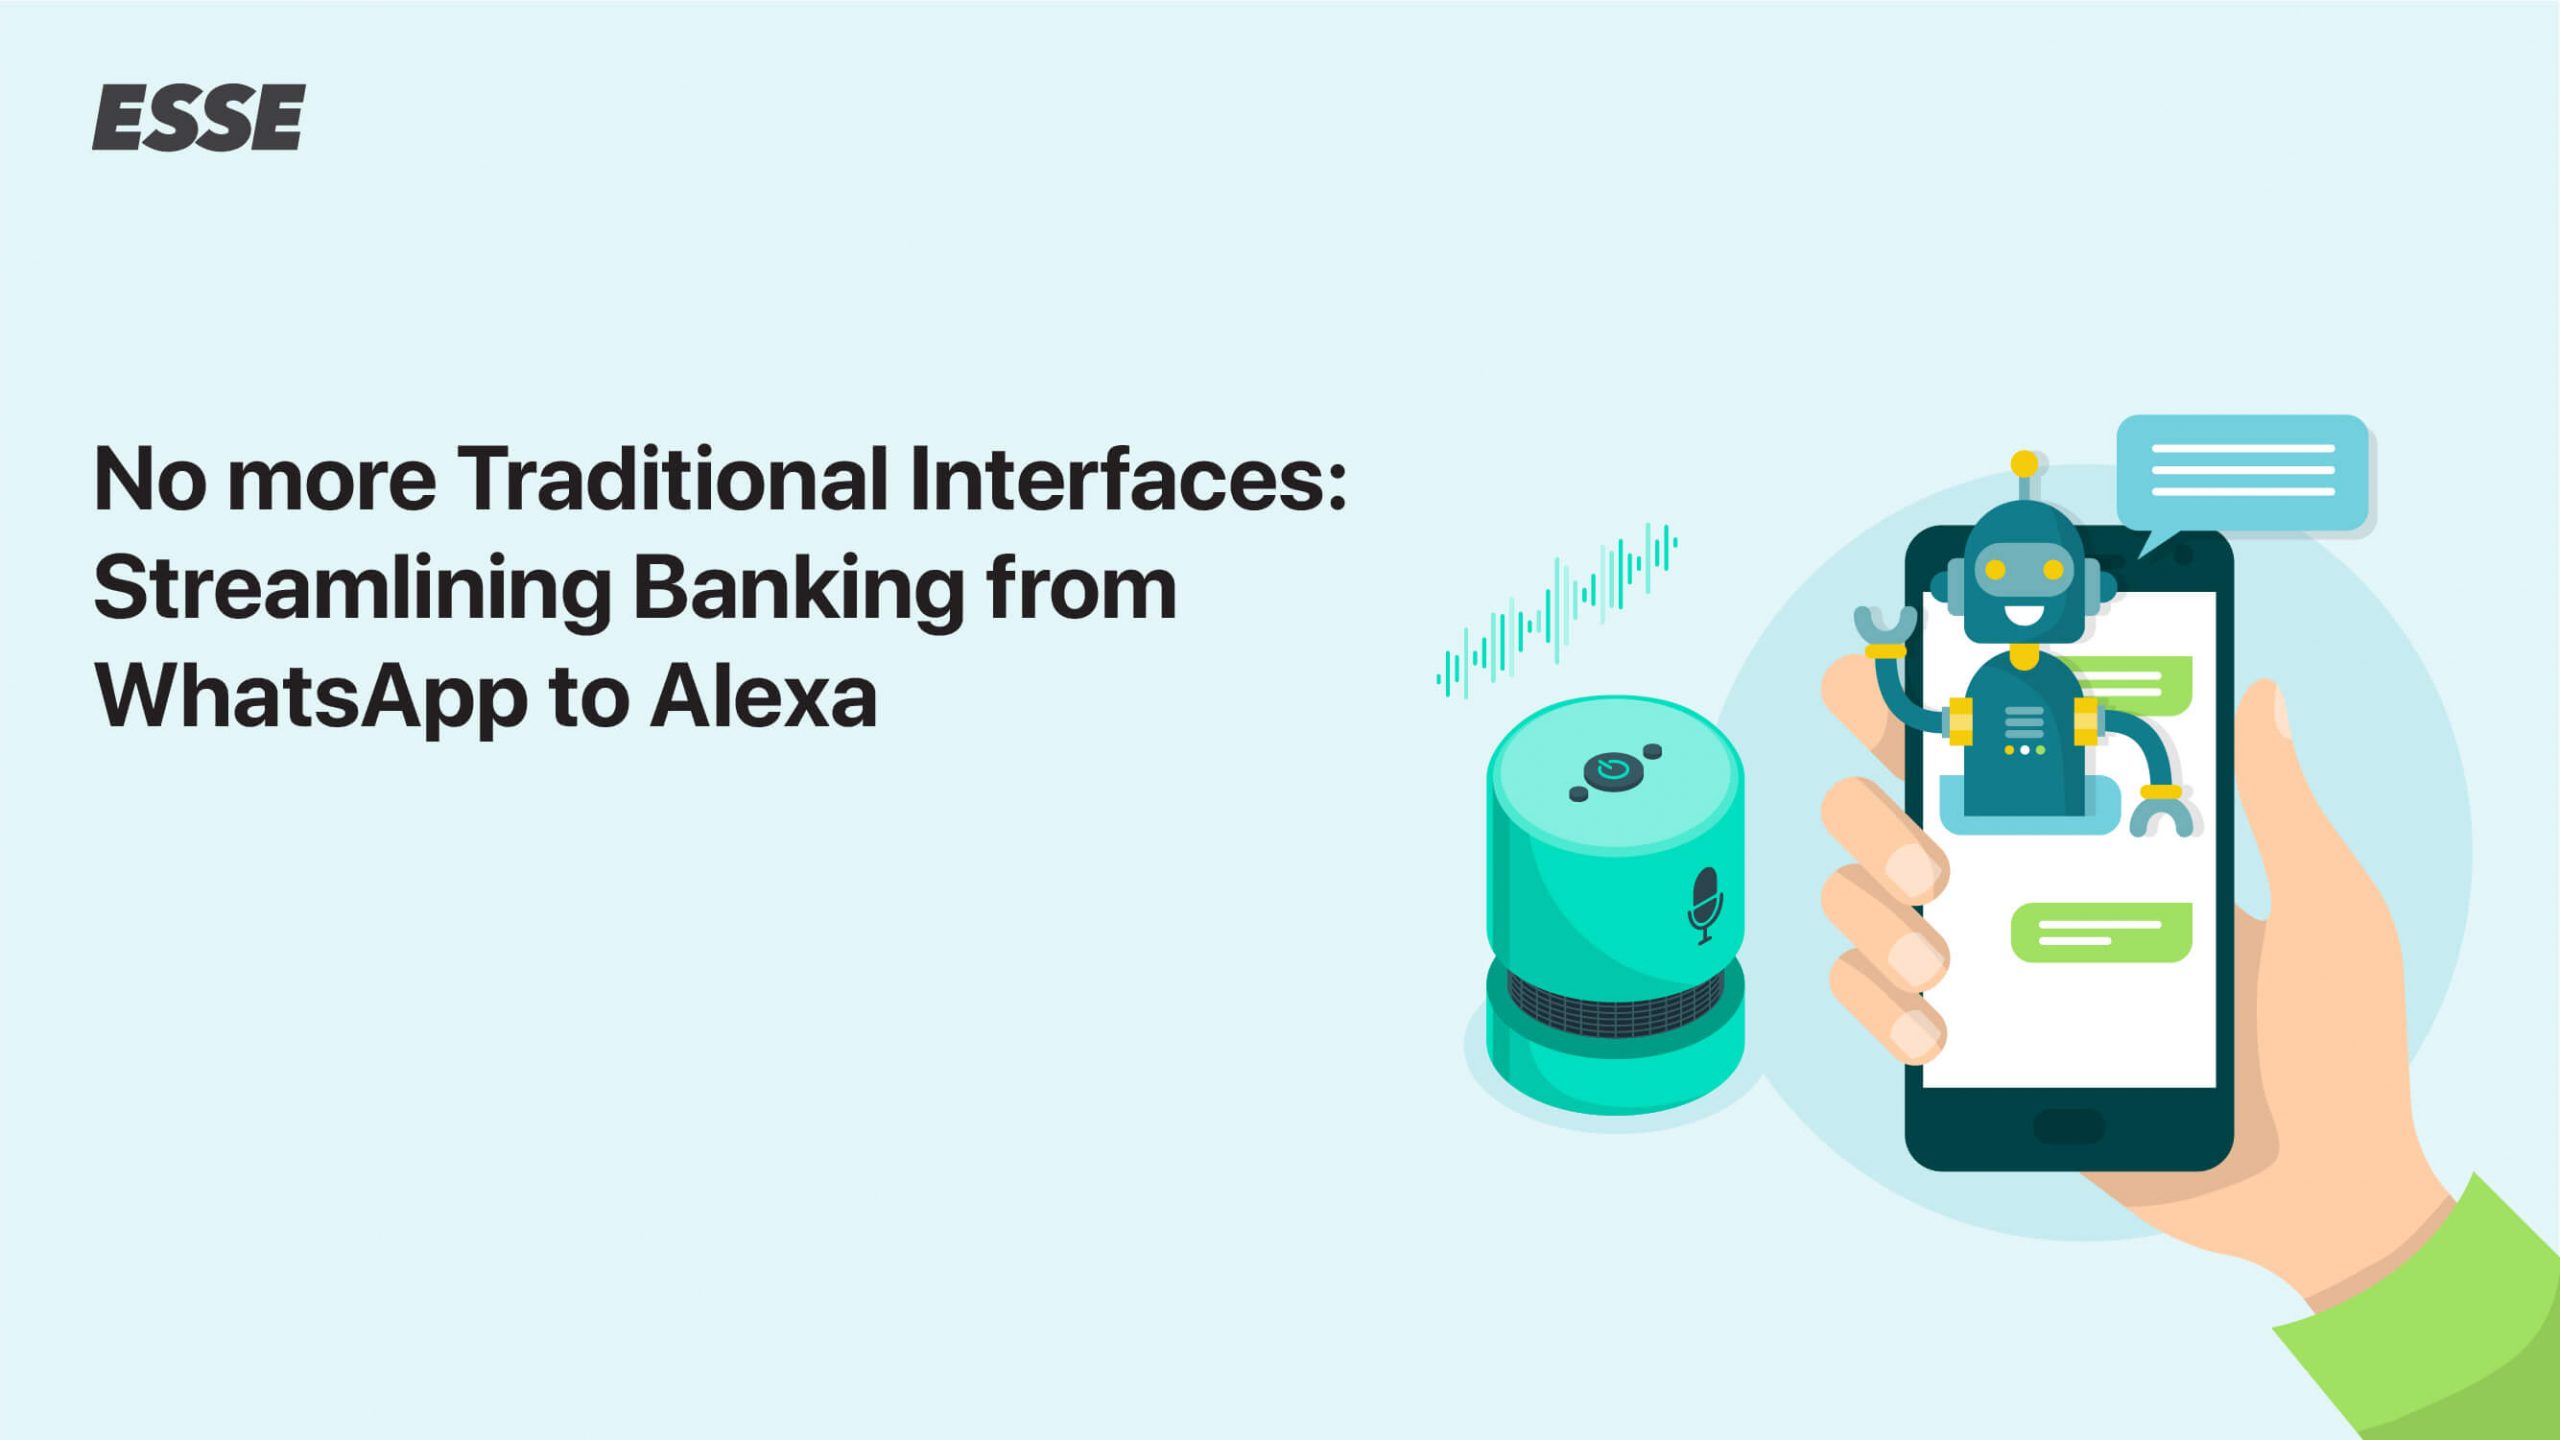 No more Traditional Interfaces: Streamlining Banking from WhatsApp to Alexa